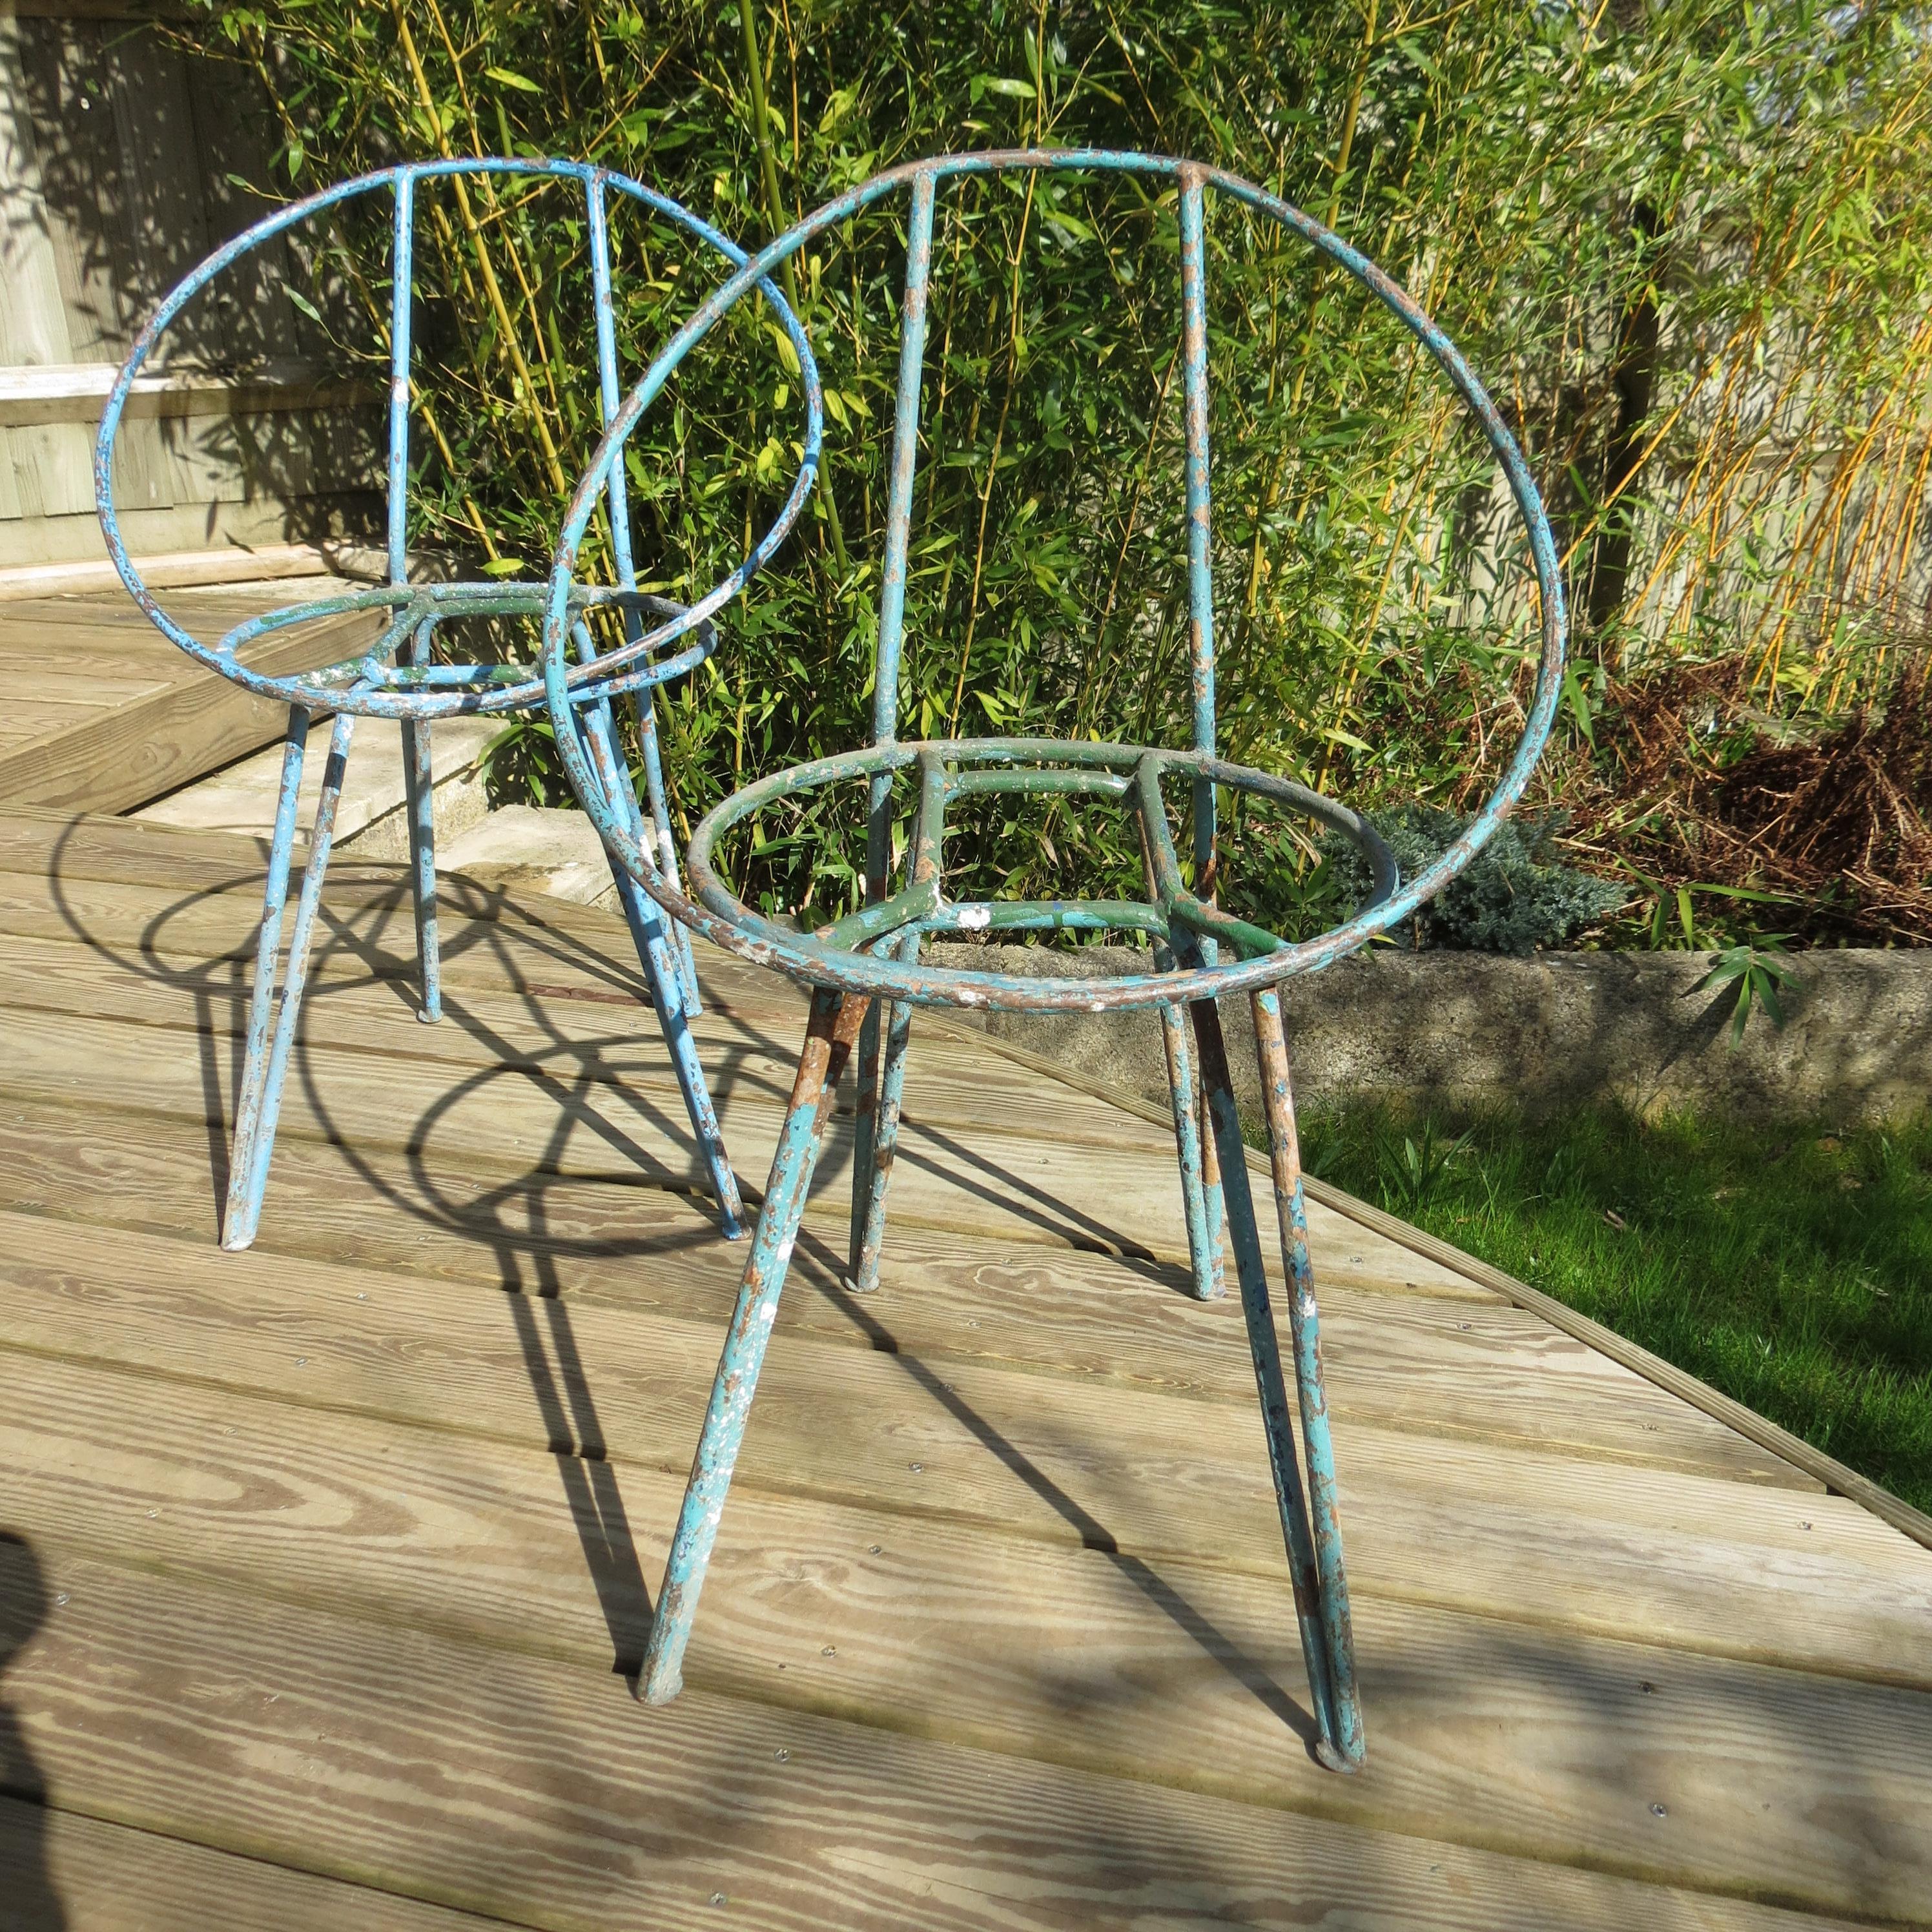 20th Century Set of 4 Metal Garden Chairs from the 1950s